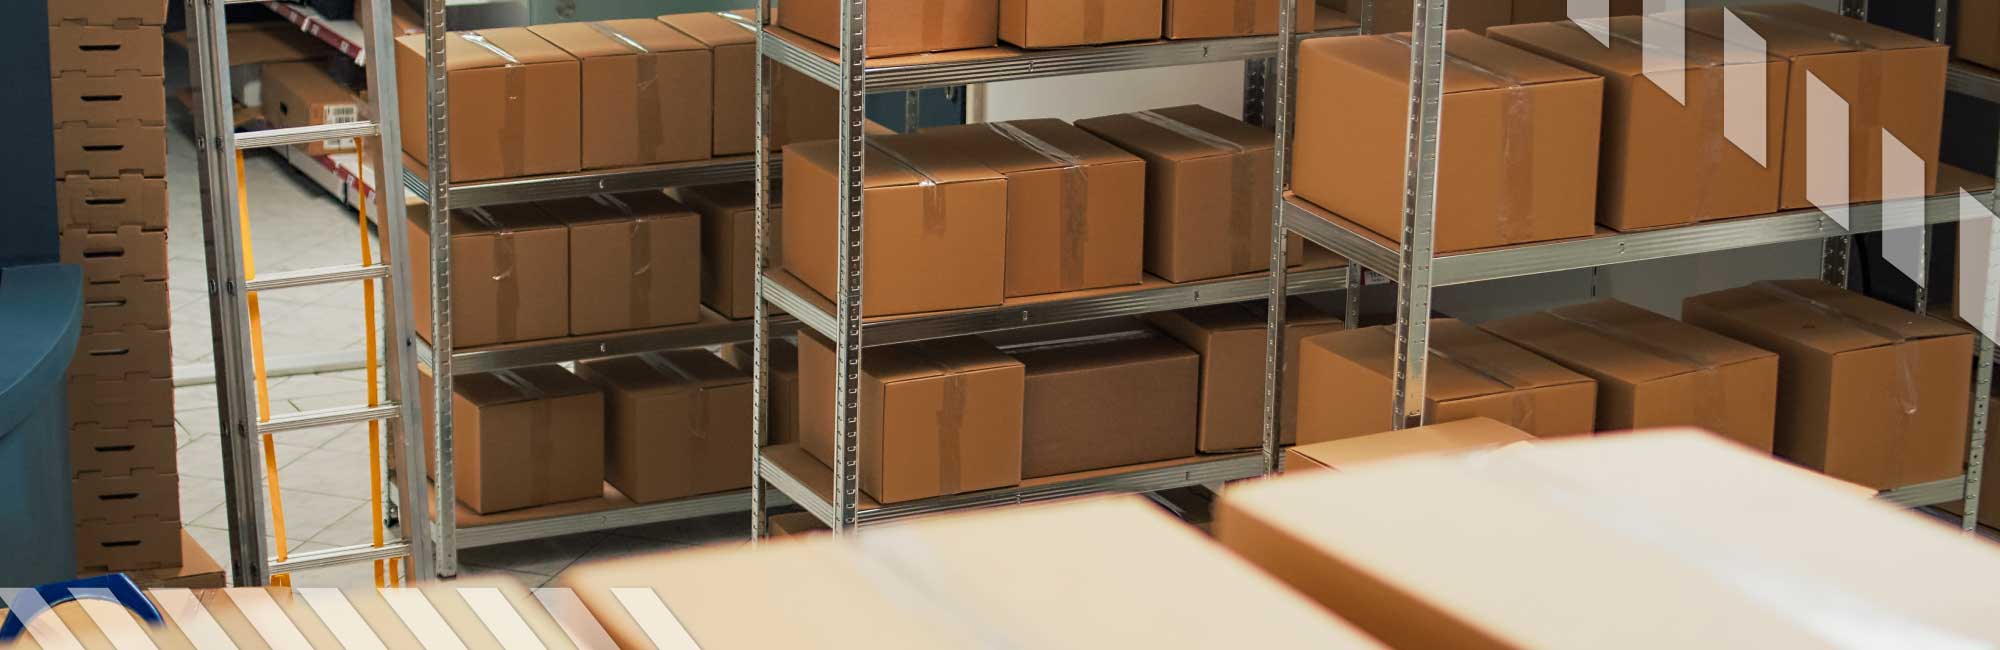 Curative Warehousing Services